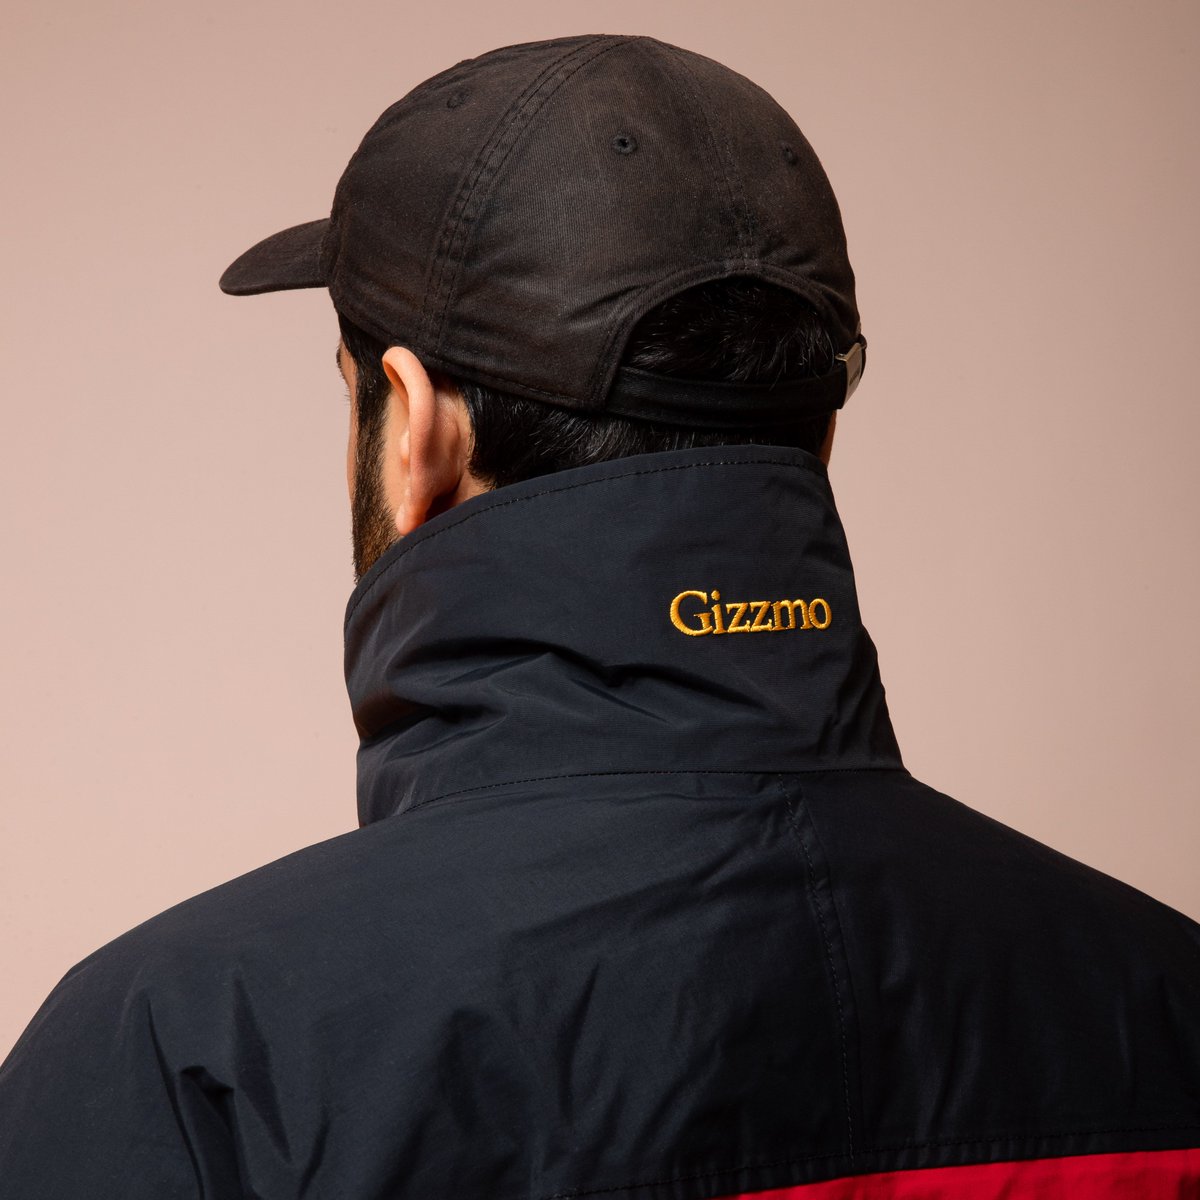 Maestro seriously Affectionate Titolo on Twitter: "stand out with the Columbia Gizzmo™ Interchange Parka  ▪️🔺🔸 take a closer look online ➡️ https://t.co/JFJ4DDVQVr small to large.  style code 🔎 1867022-613 #columbia #gizzmo #parka #titolo #titolostyle  #titoloshop #